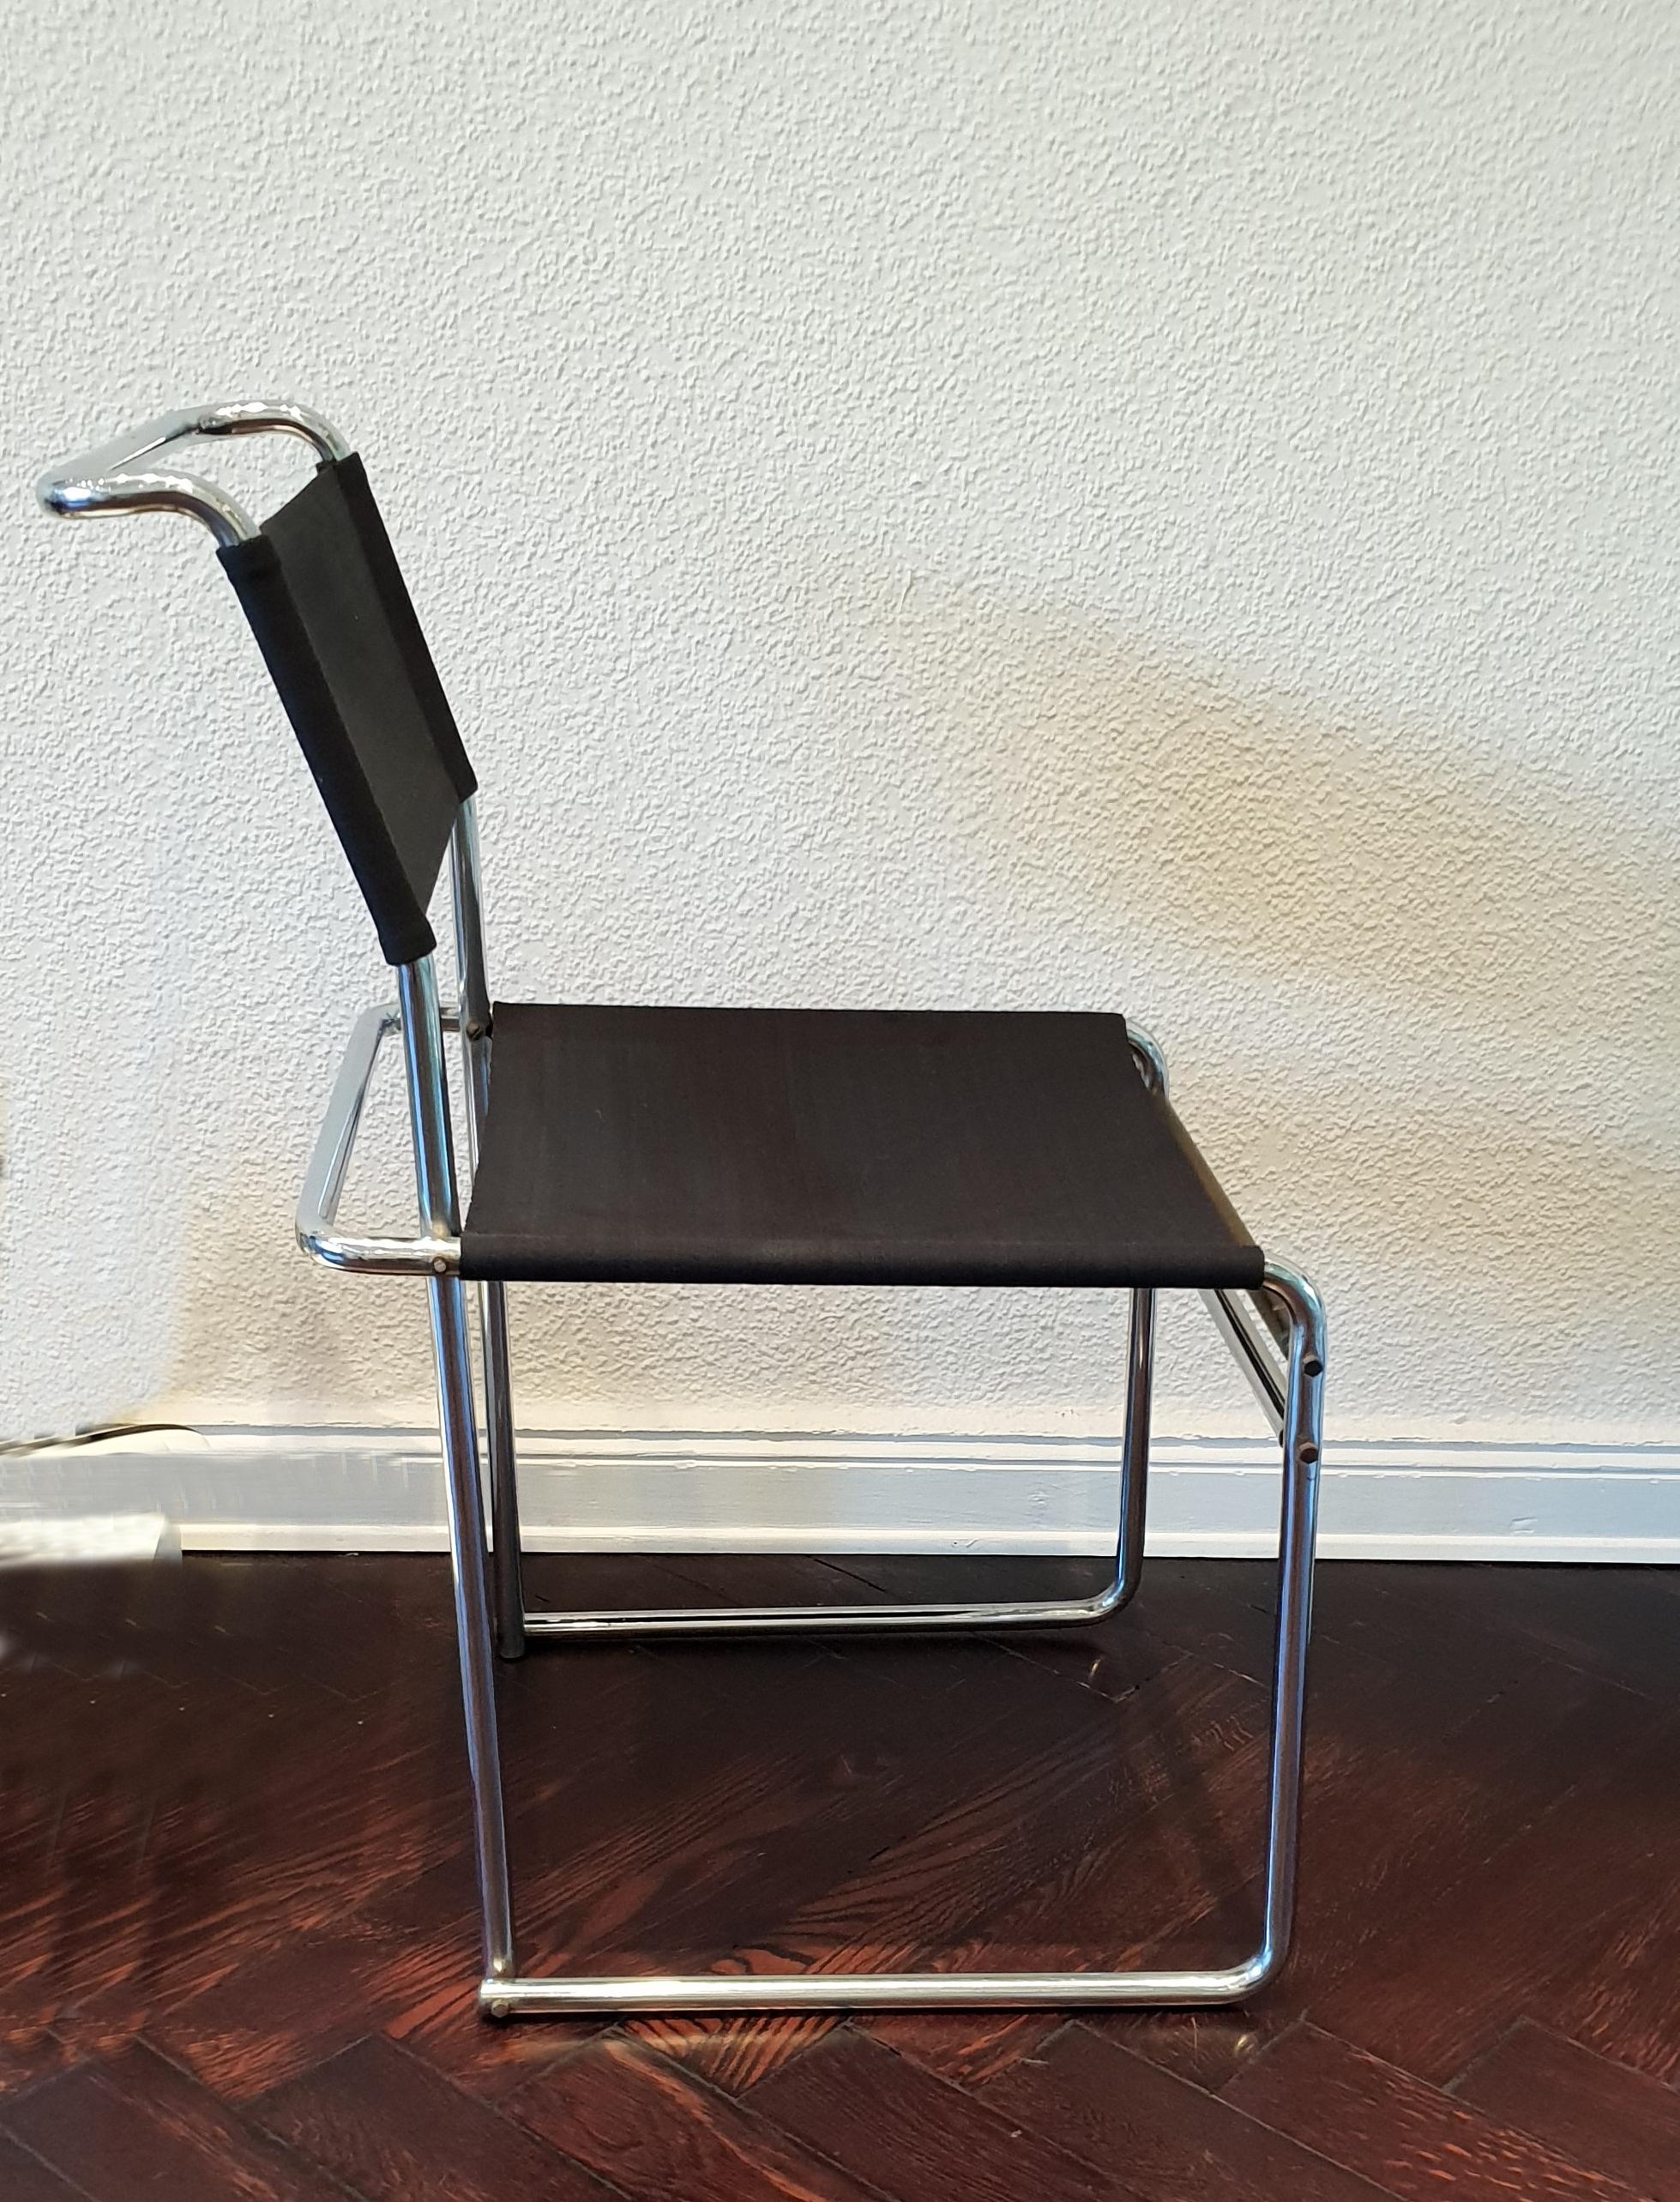 Tubular steel chair, 1927. Model B5. Designer: Marcel Breuer, Manufactured by Standart-Möbel. Steel tube, nickel-plated.
Upholstered with black, reneved Eisengarn ( iron yarn ). Very rare. Good condition.
Measurements: Height: 32.28 in ( 82 cm ),